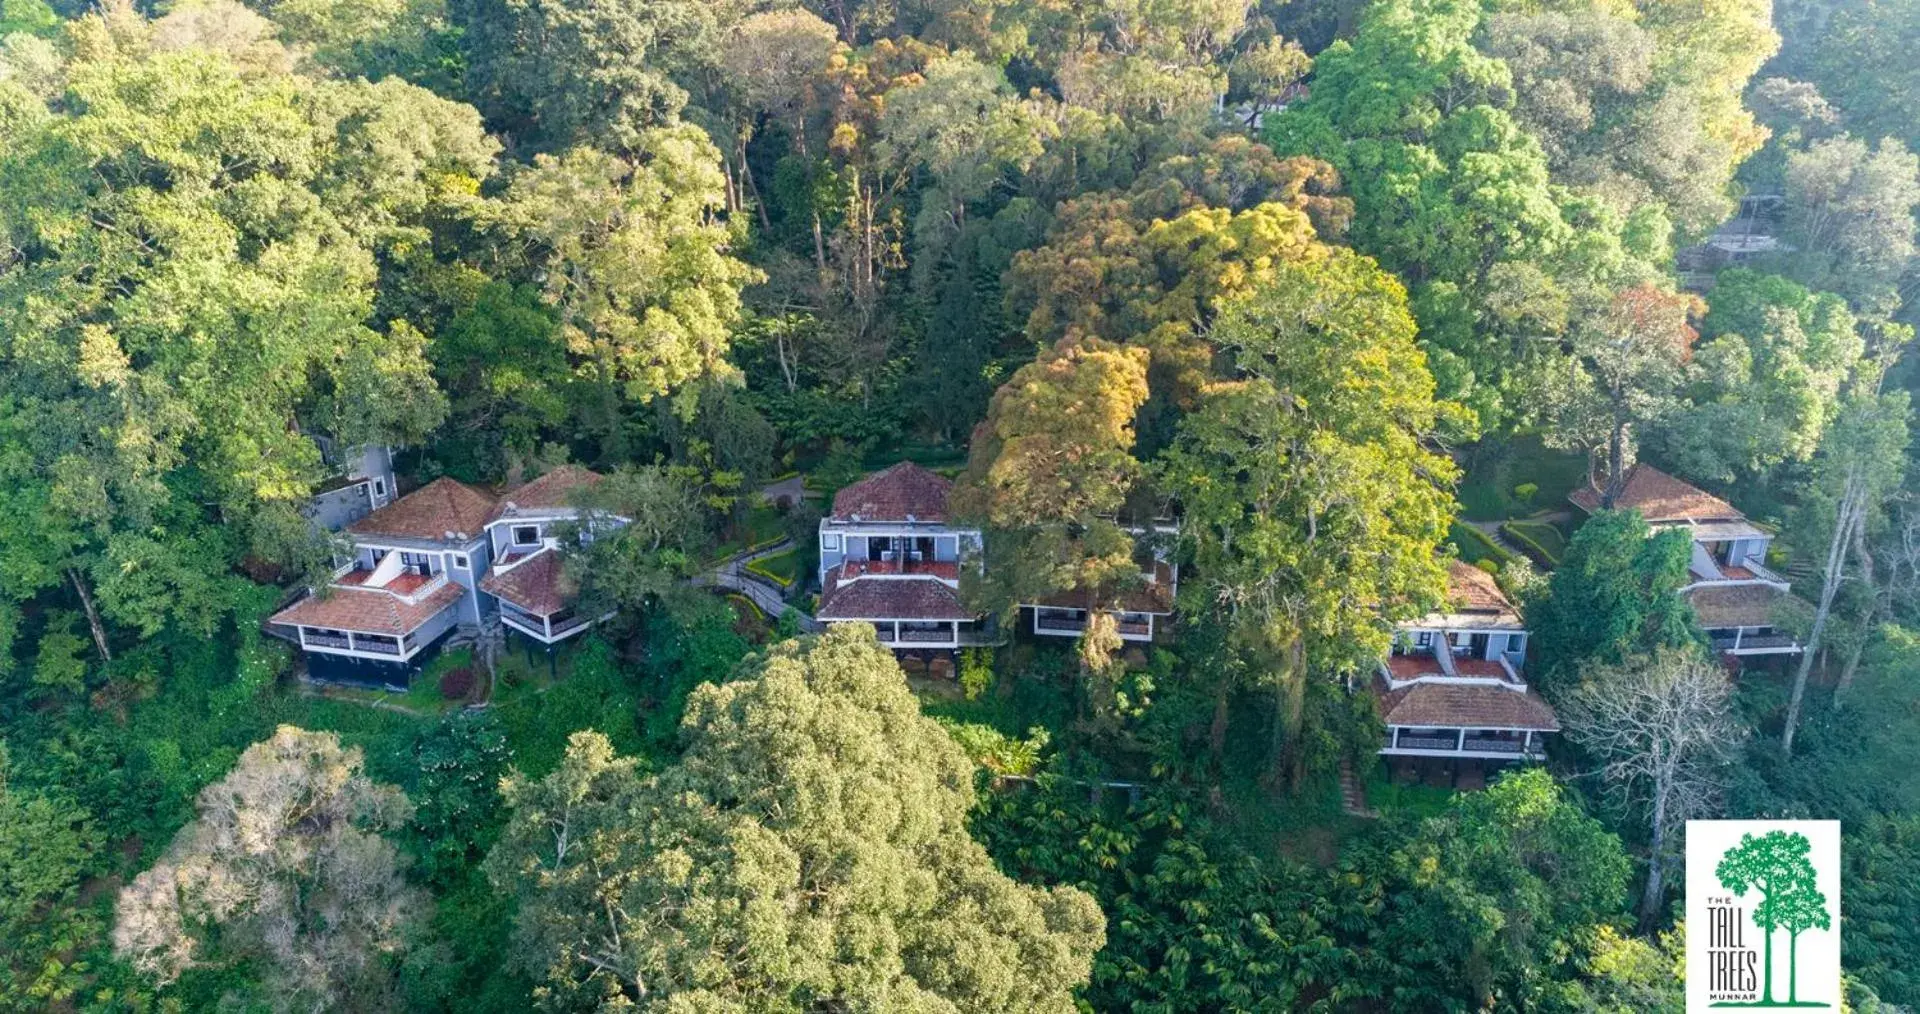 Area and facilities, Bird's-eye View in The Tall Trees Munnar